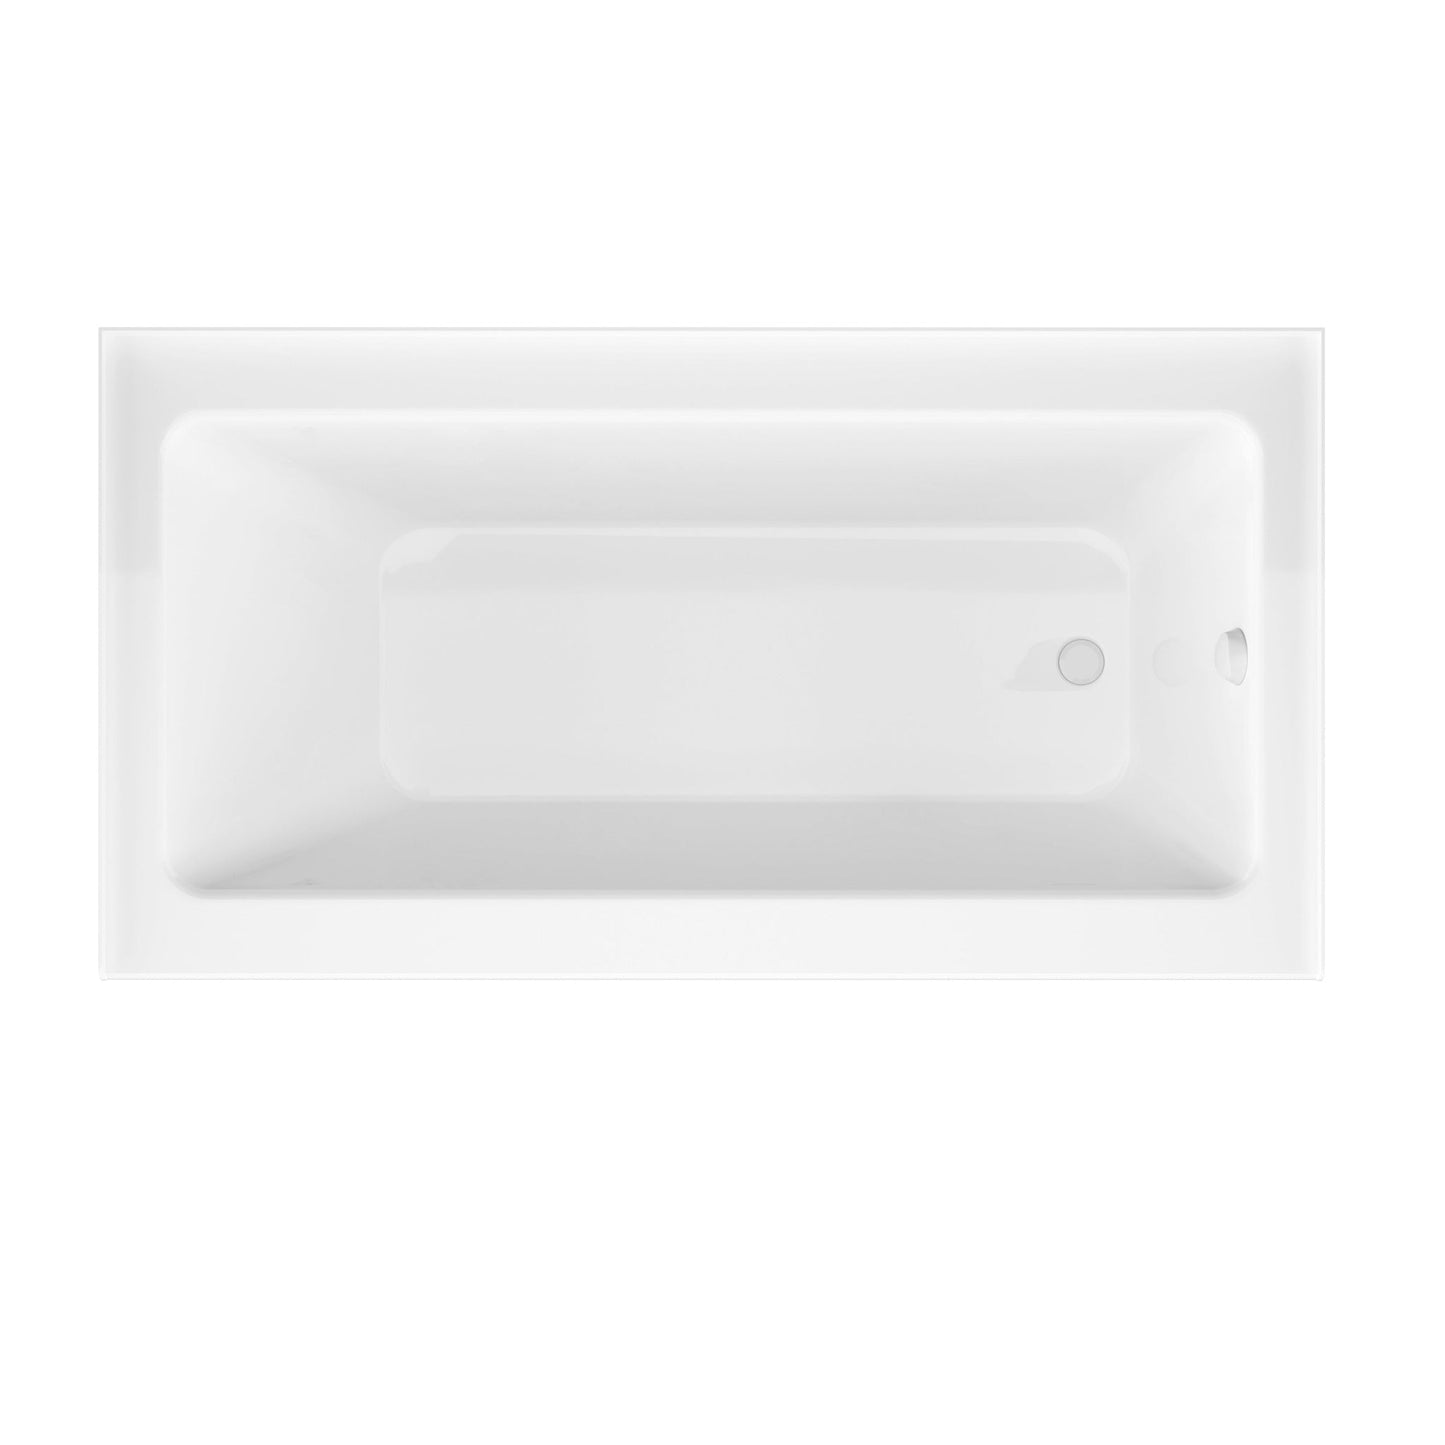 ANZZI Myth Series White "60 x 30" Alcove Right Drain Rectangular Bathtub With Built-In Flange and Frameless Brushed Nickel Hinged Door